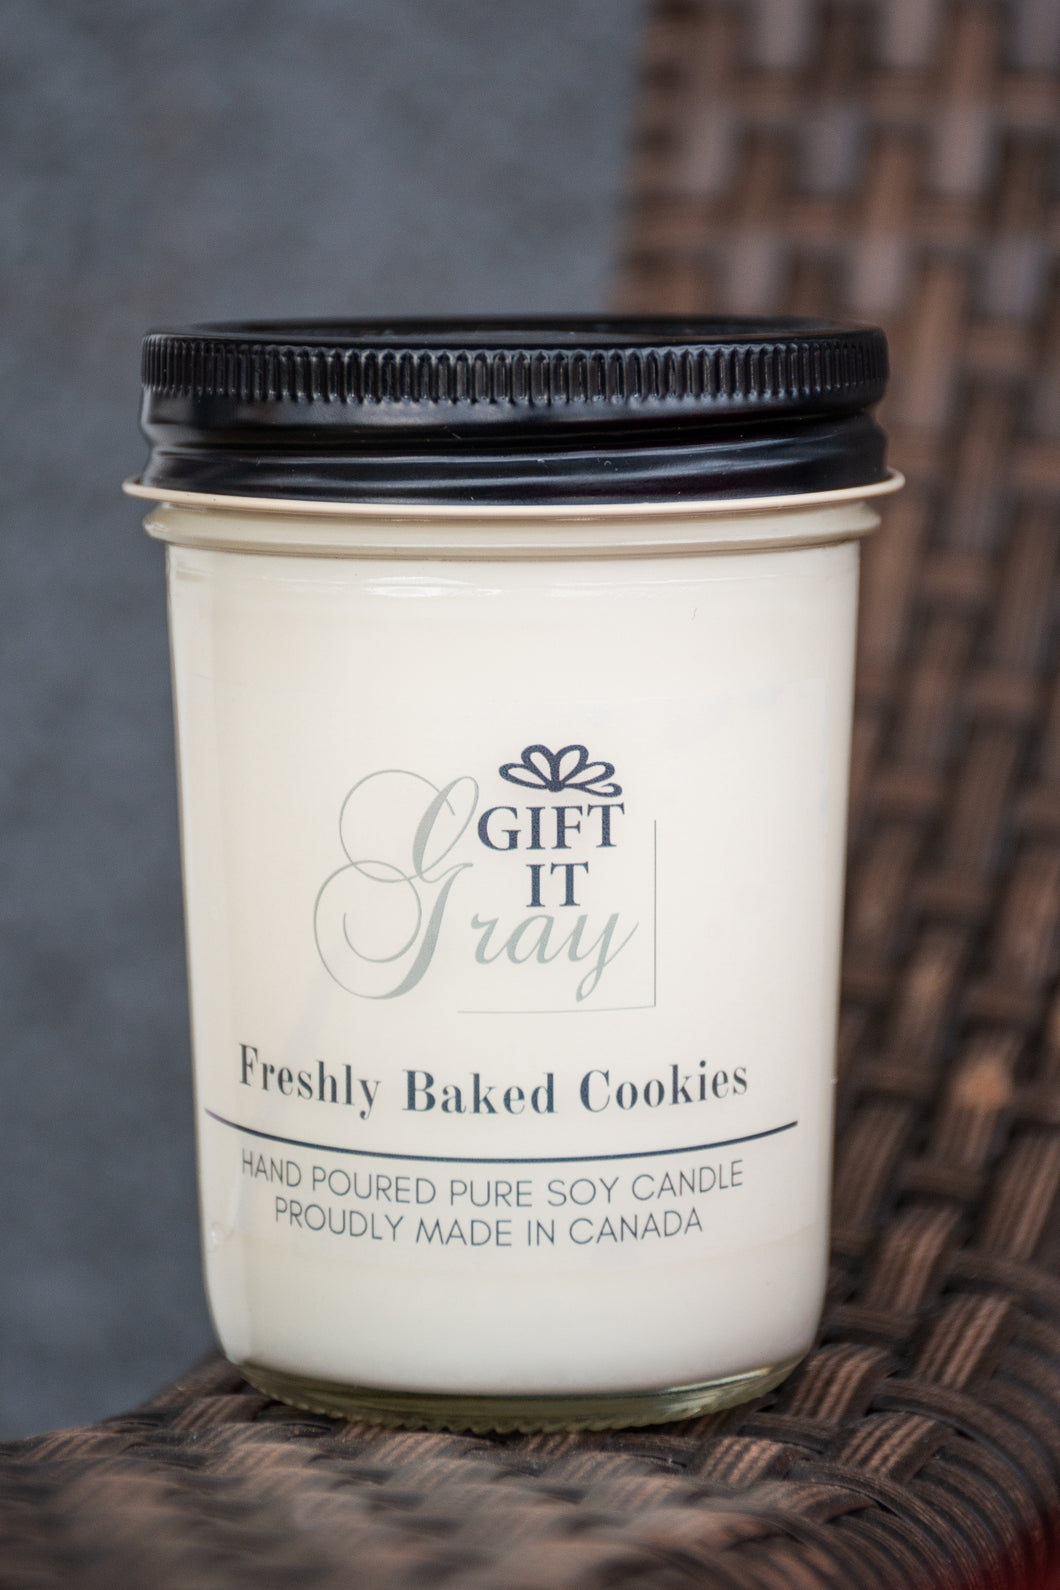 Freshly Baked Cookies Gift It Gray Soy Candle